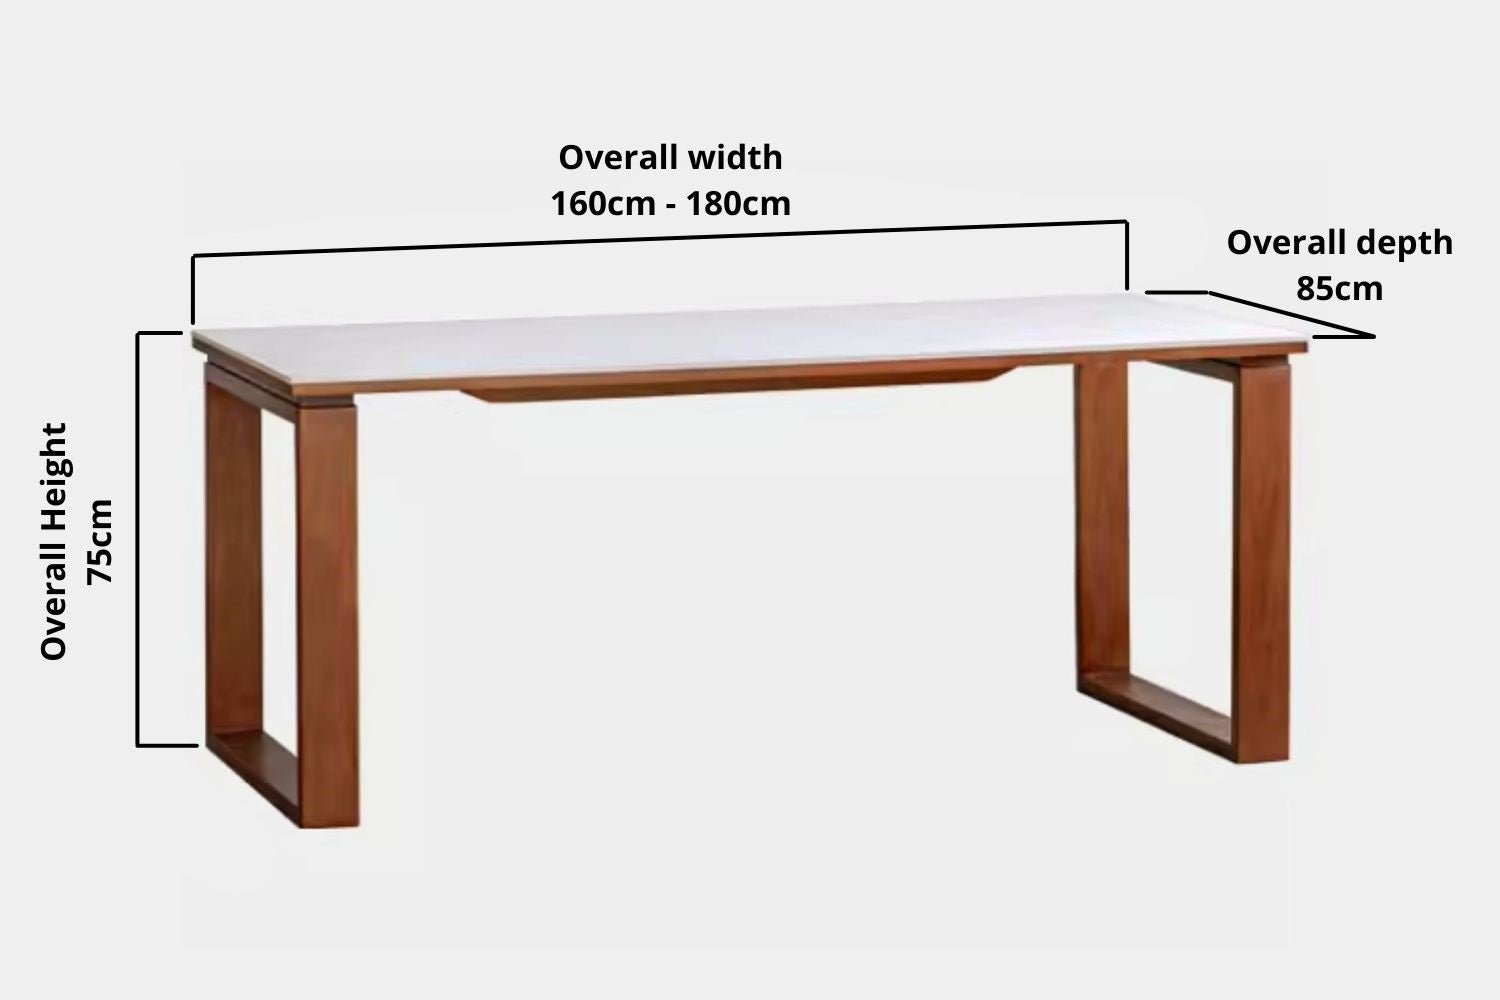 Key product dimensions such as depth, width and height for Tanner Sintered Stone Dining Table